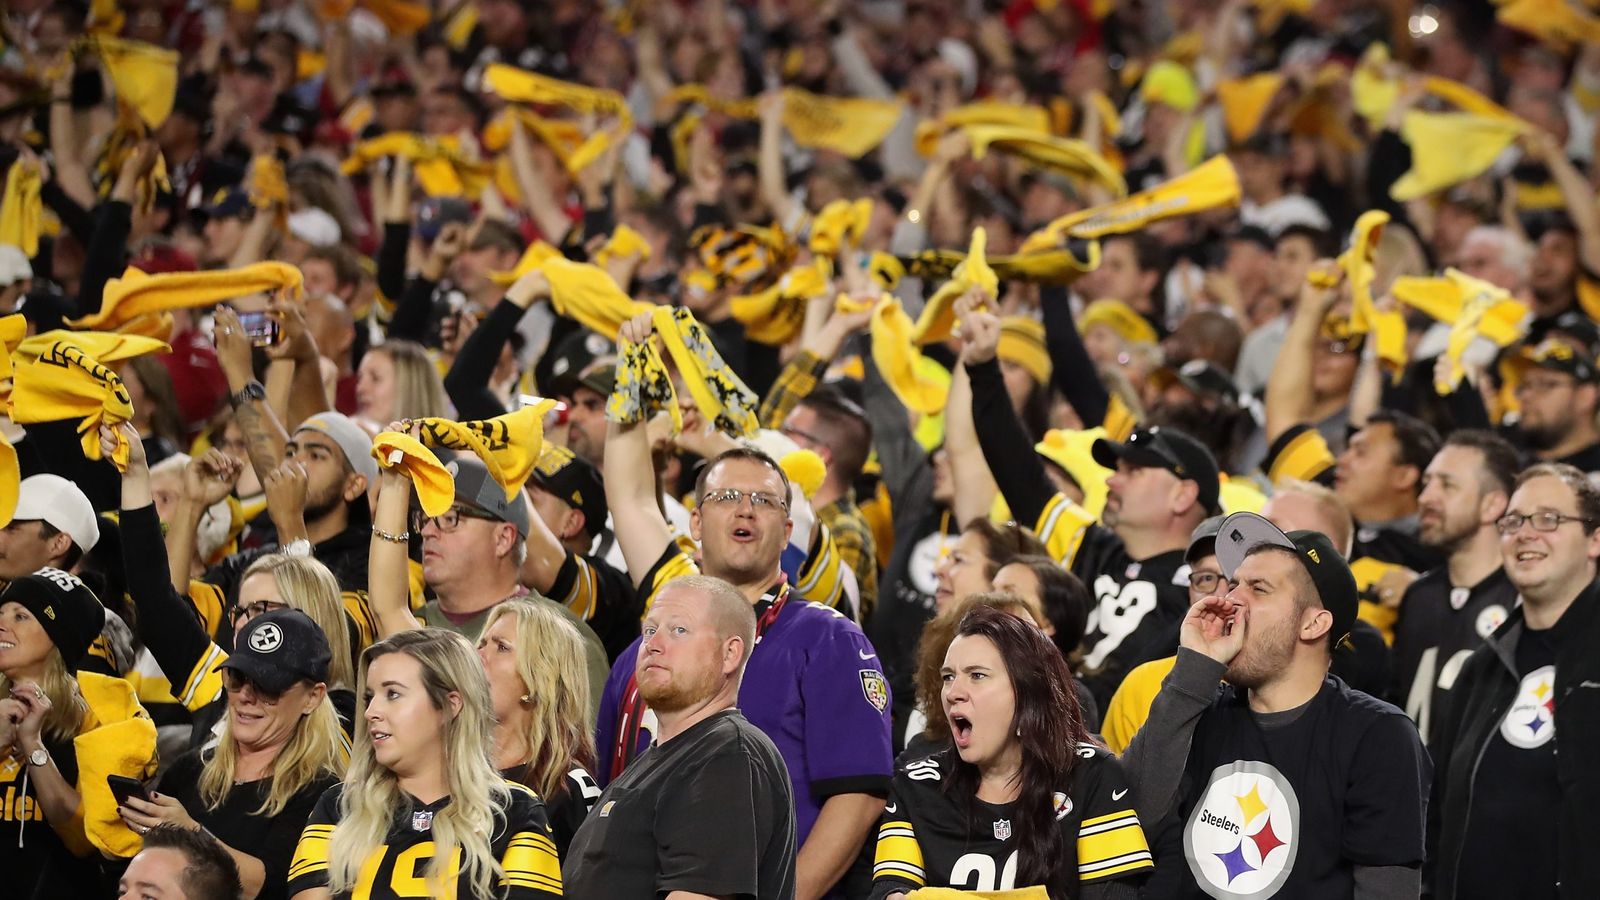 What   TV's Sunday NFL Ticket Deal Means for Football Fans